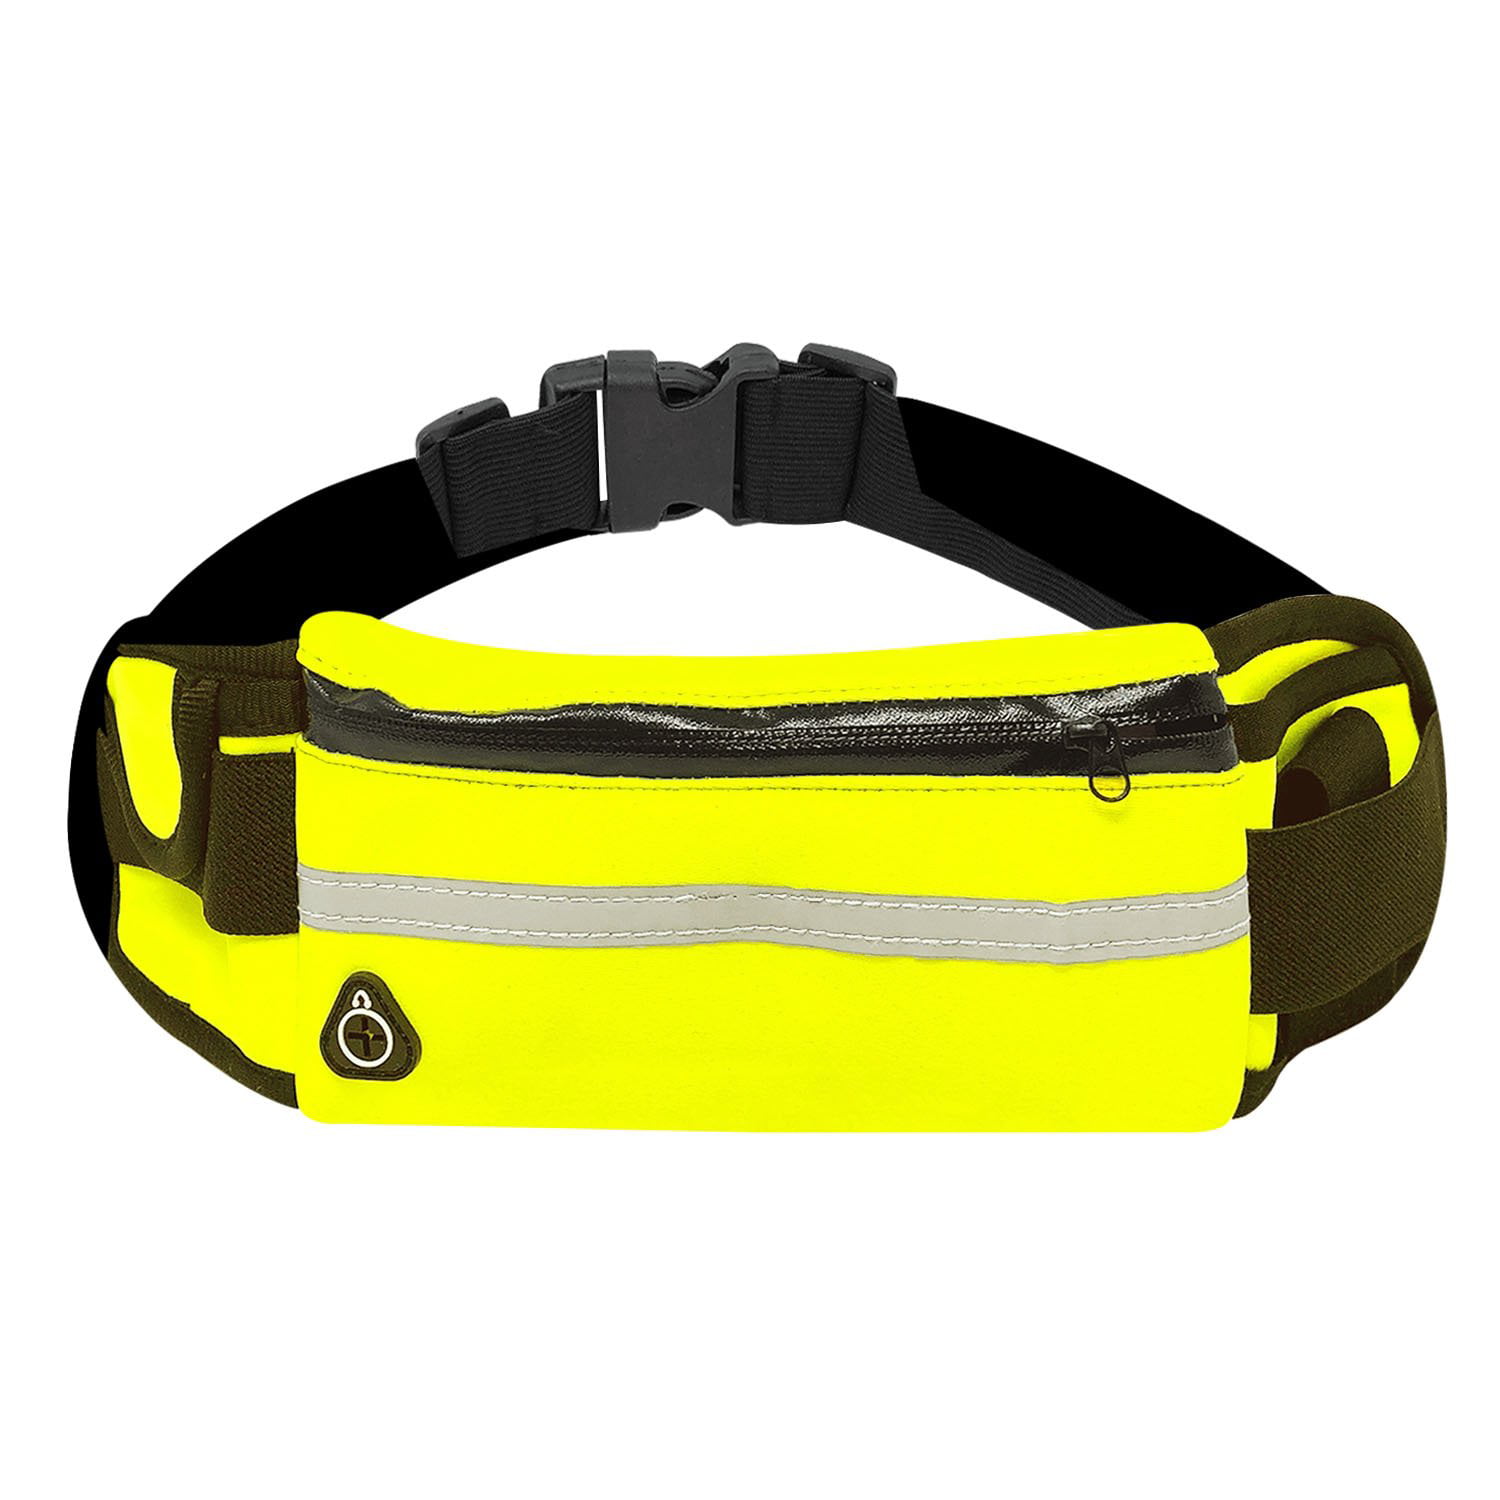 Walking Gym Fits iPhone or Mobile Phone Jogging kwmobile LED Running Waist Belt Cycling Reflective Fitness Gear Fanny Pack Bum Bag for Sports